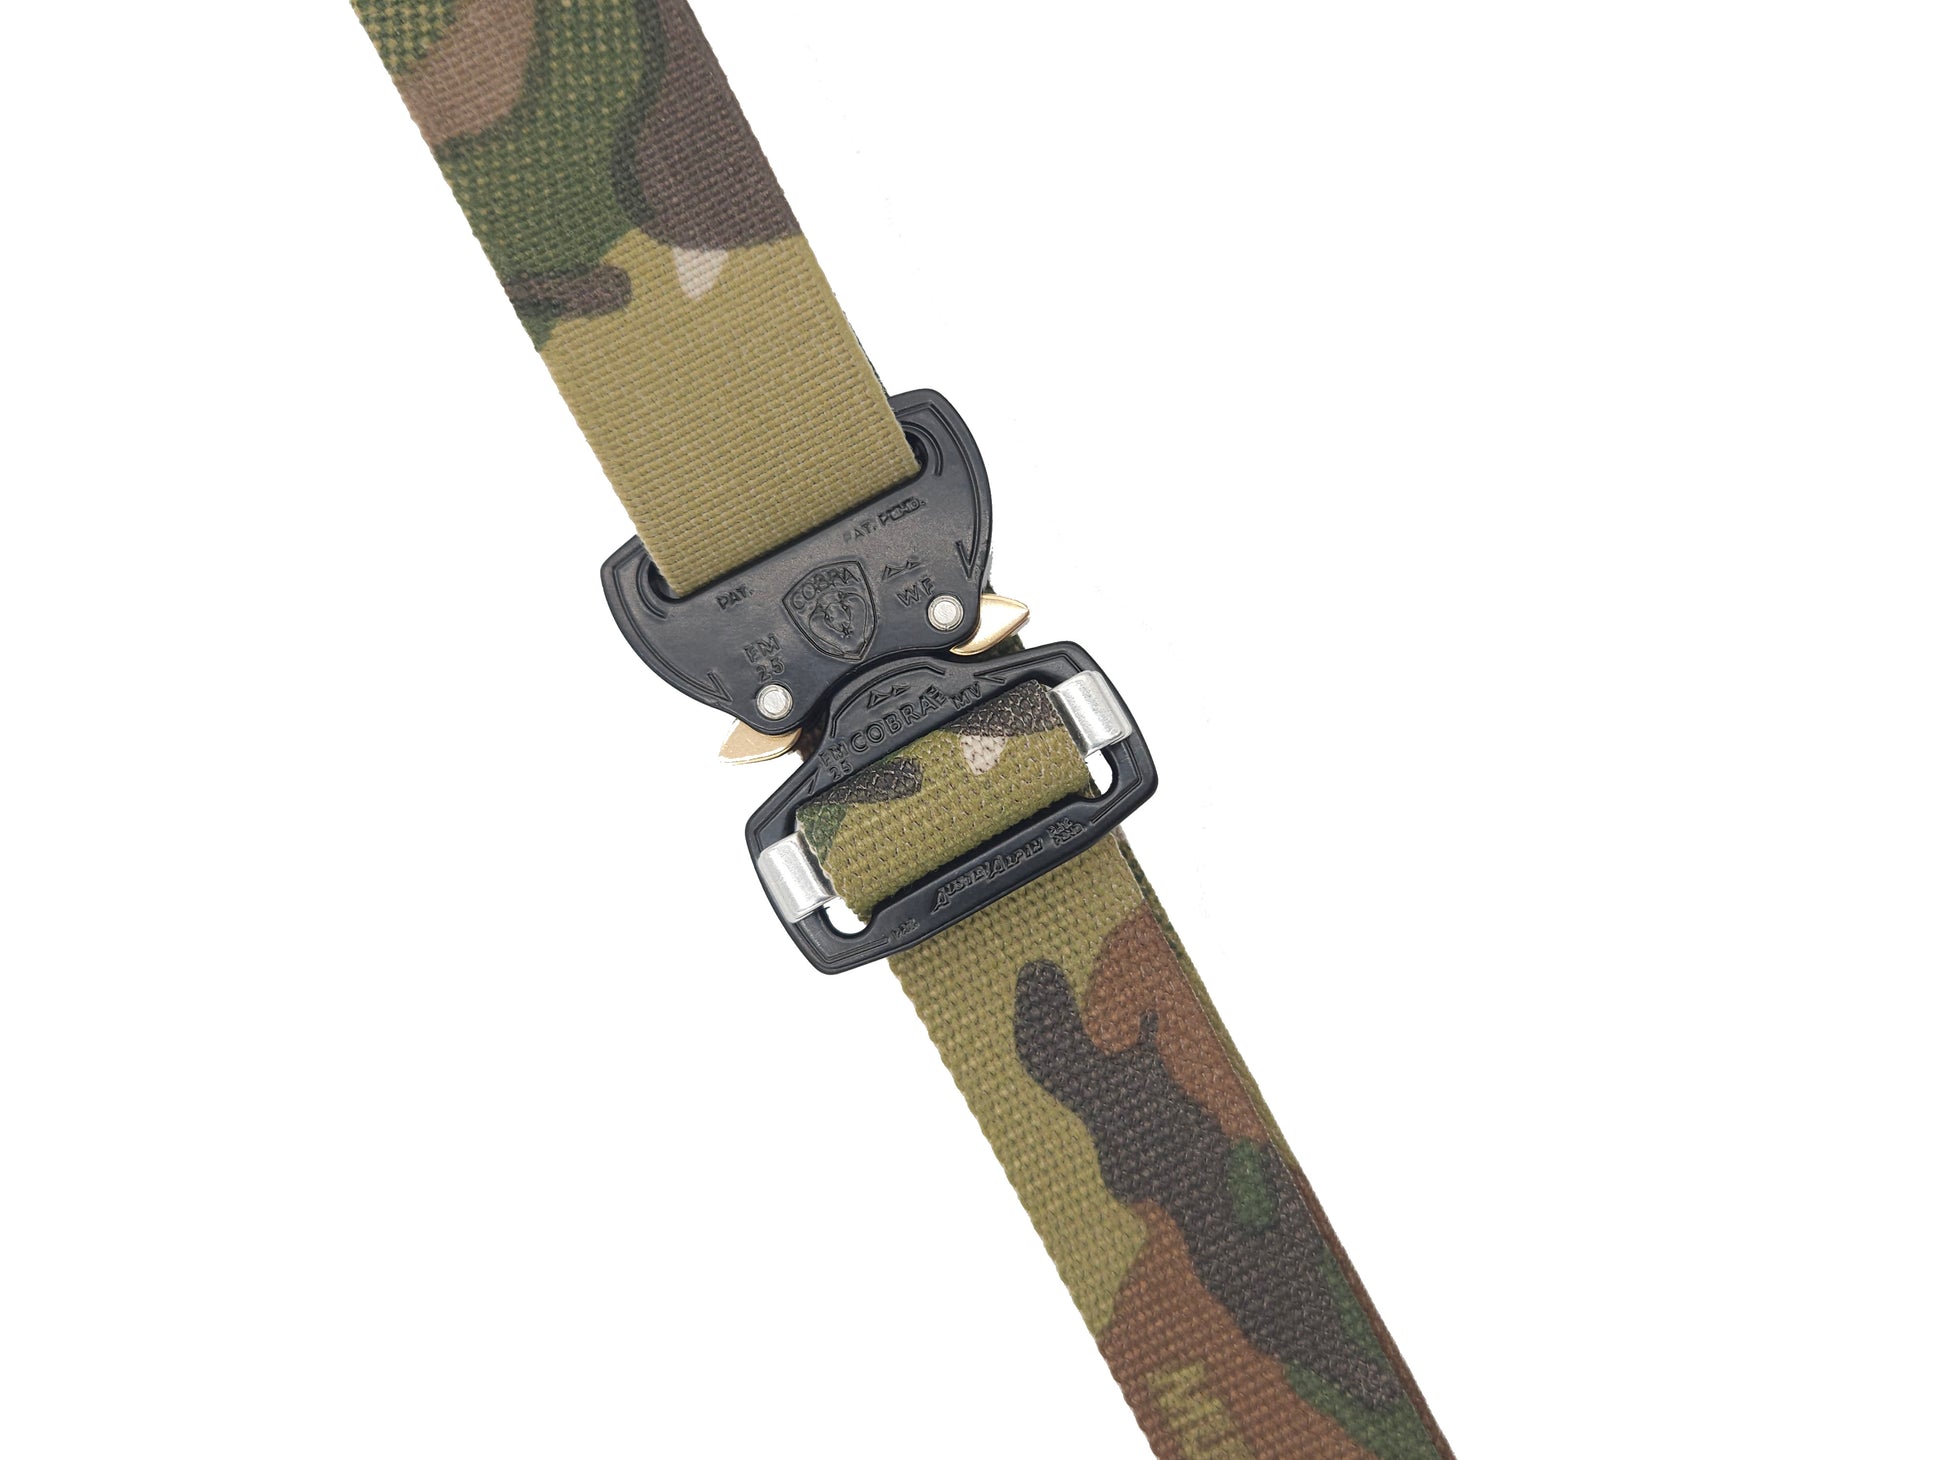  2pc EDC Tactical Leg Strap, Thigh Strap Belt for Leg Holster,  Military Leg Hanger Band Thicker and Longer for Hunting and Outdoors Unisex  : Sports & Outdoors